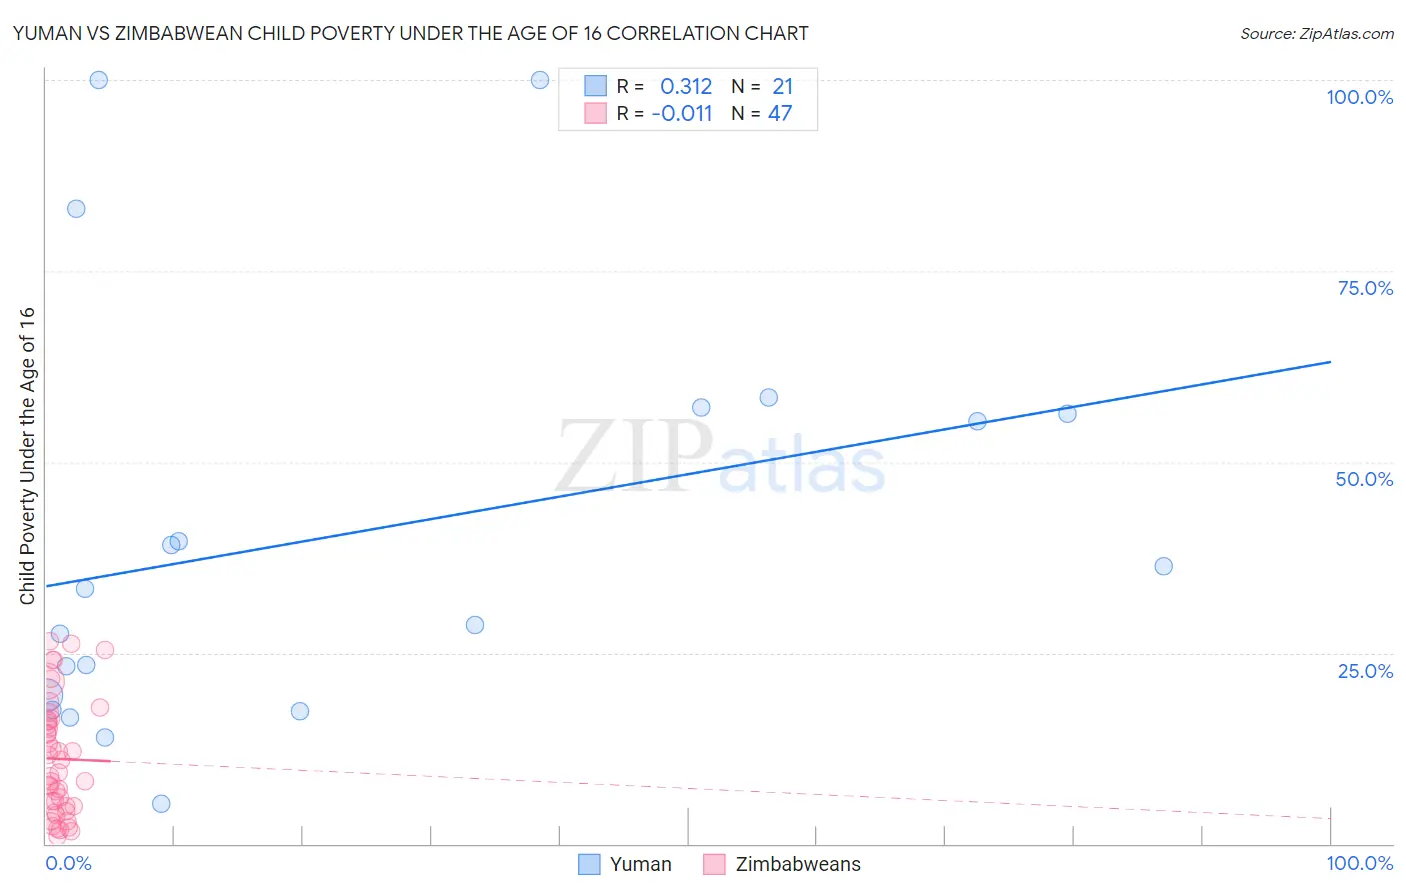 Yuman vs Zimbabwean Child Poverty Under the Age of 16